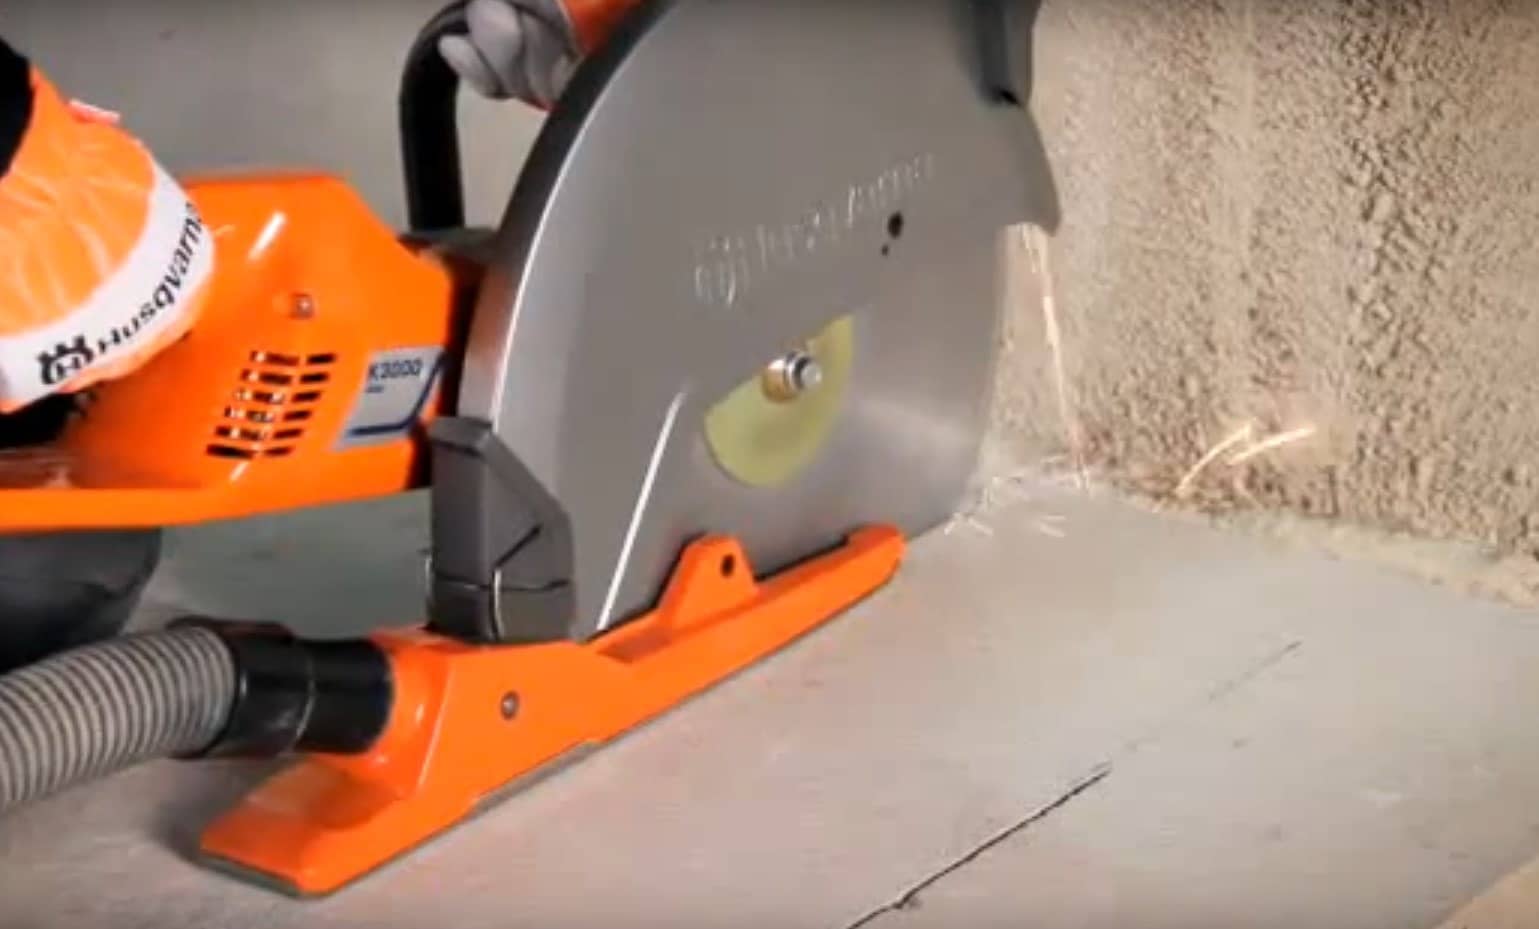 Can I use an angle grinder to cut concrete?